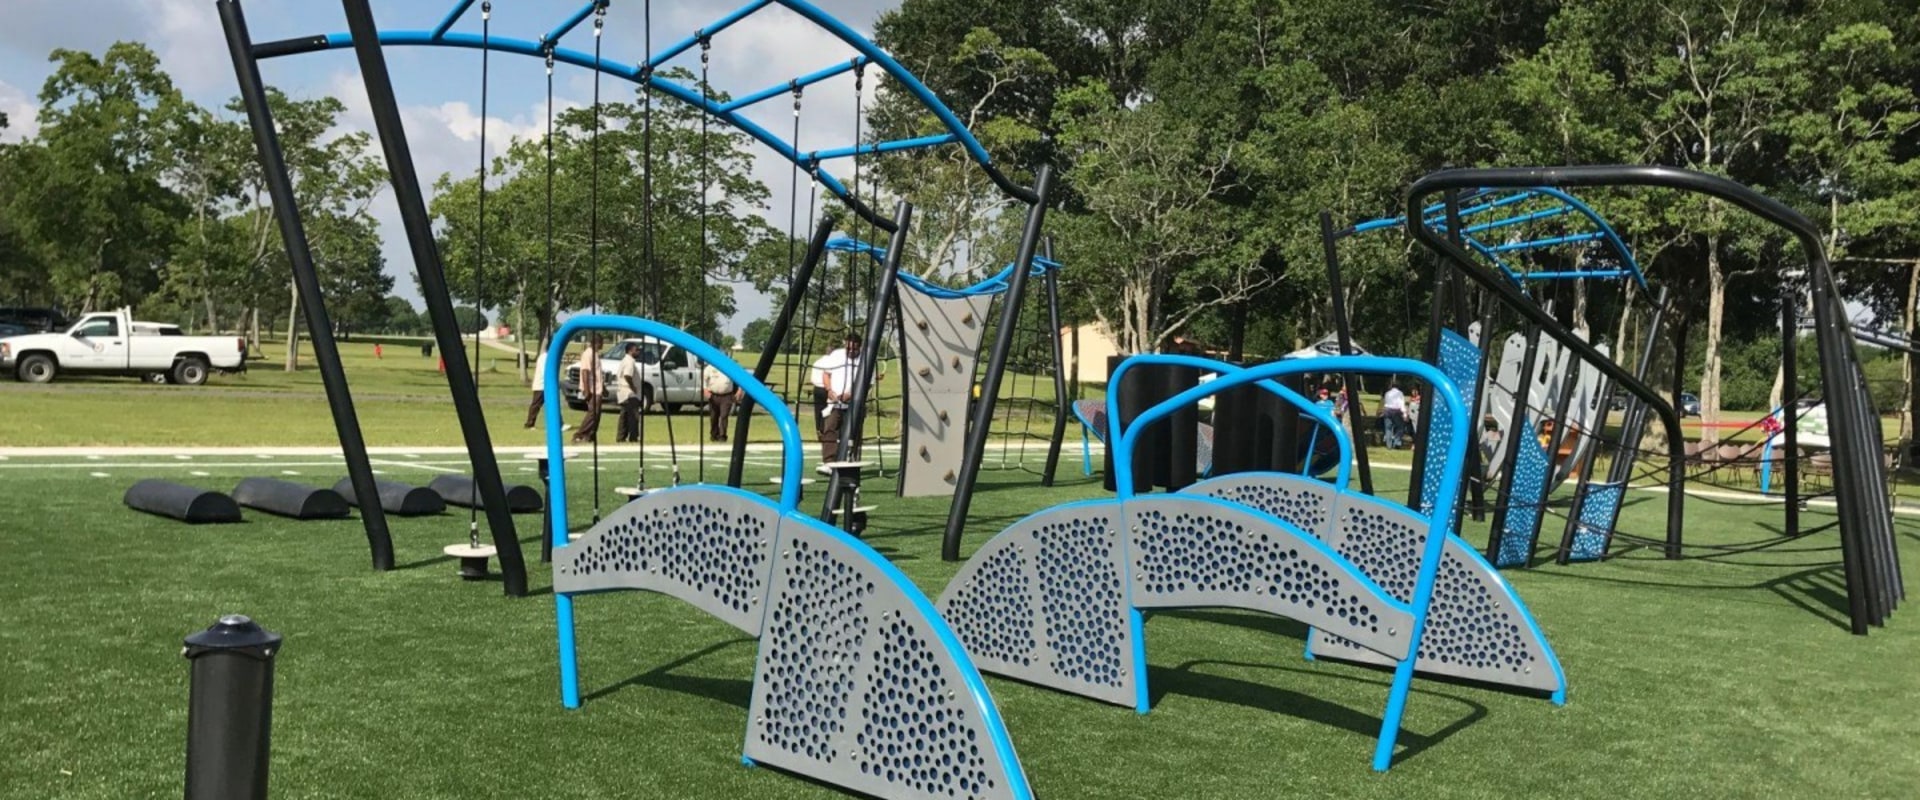 Exploring the Outdoor Fitness Centers in Katy, Texas